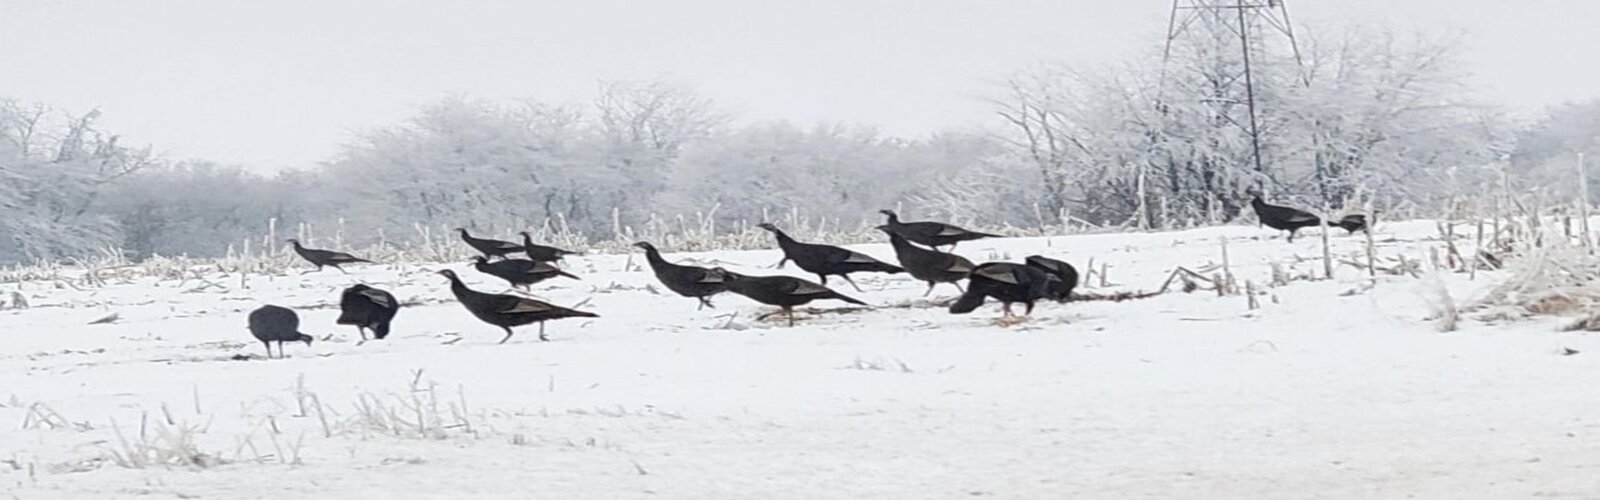 A group of birds in winter snow.